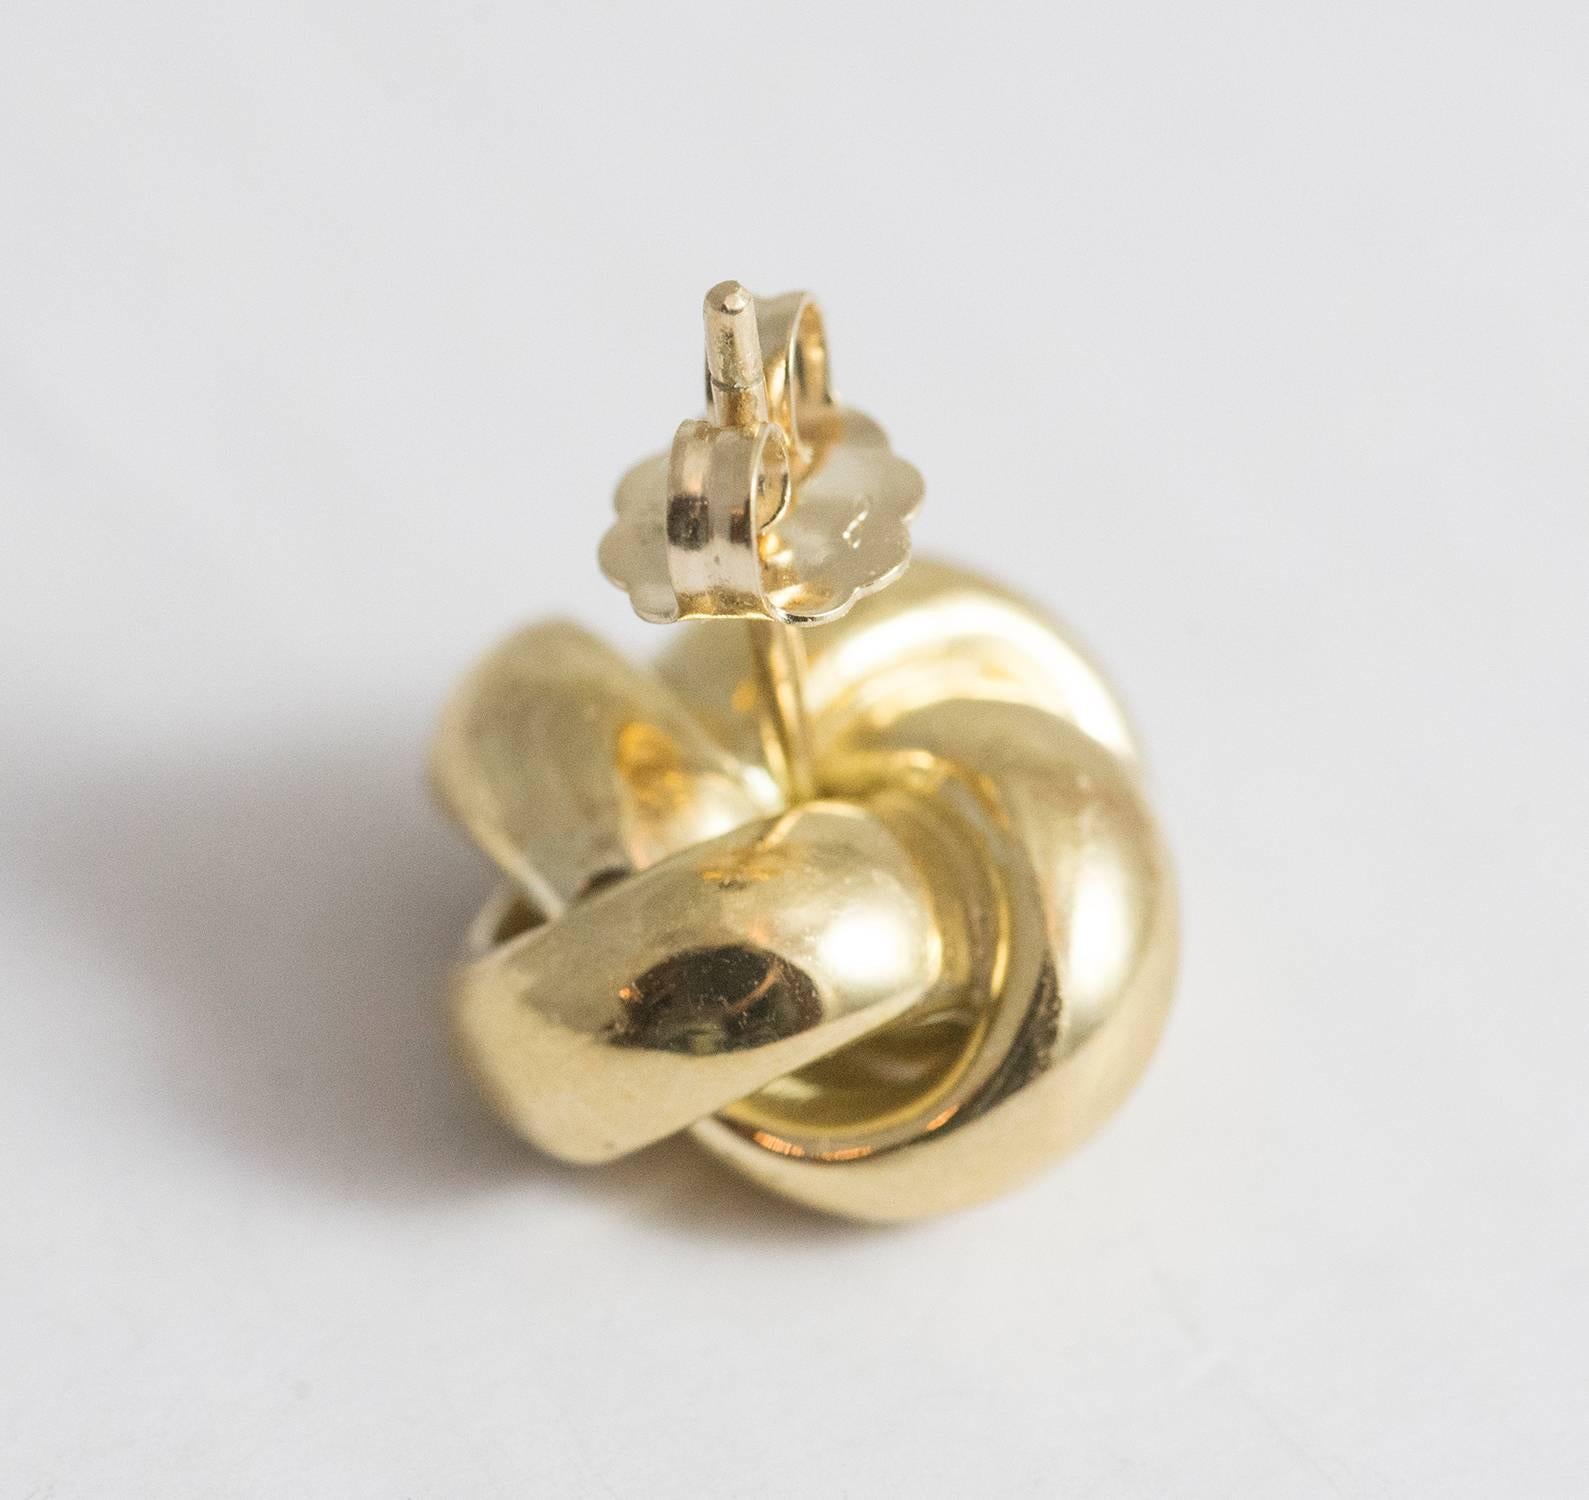 A classic pair of love knot earrings in 18K yellow gold. These earrings are finished by a post and butterfly and are in excellent condition.